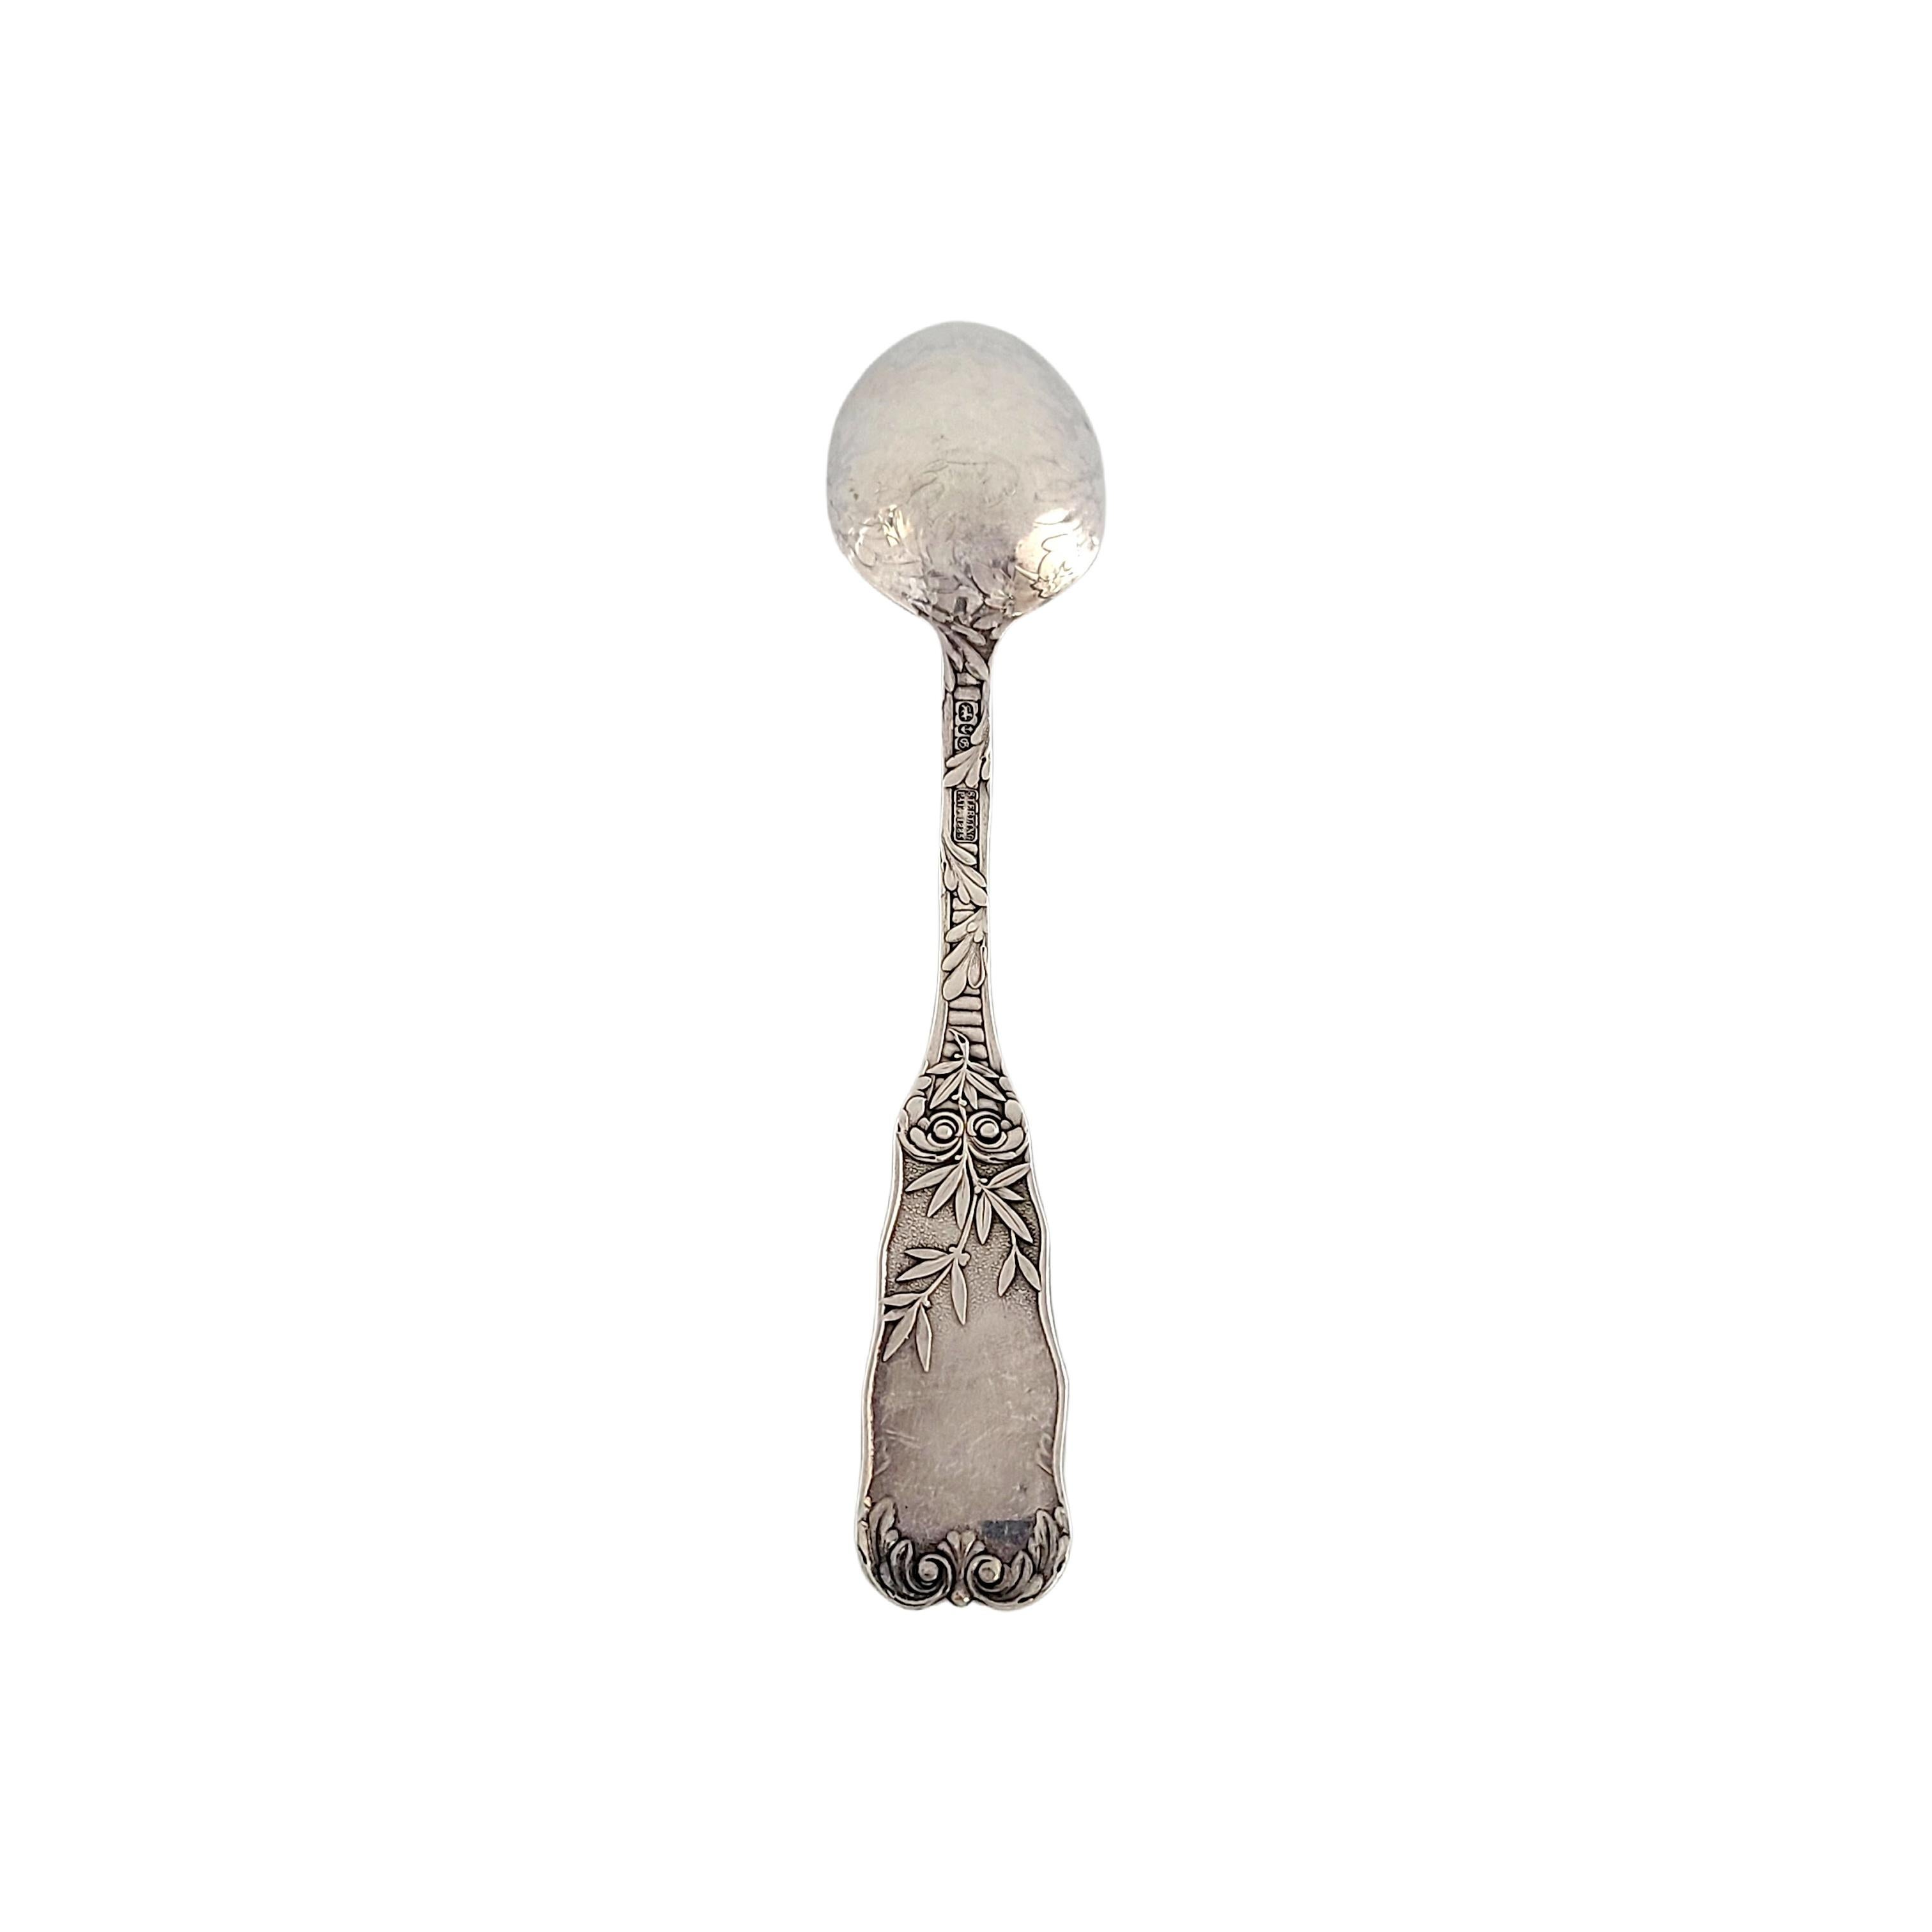 Sterling silver table spoon by Gorham in the St Cloud pattern.

No monogram.

Gorham's St Cloud pattern was designed by Walter Wilkinson in 1885. This spoon features a scroll and leaf design on the handle.

Measures 7 7/8